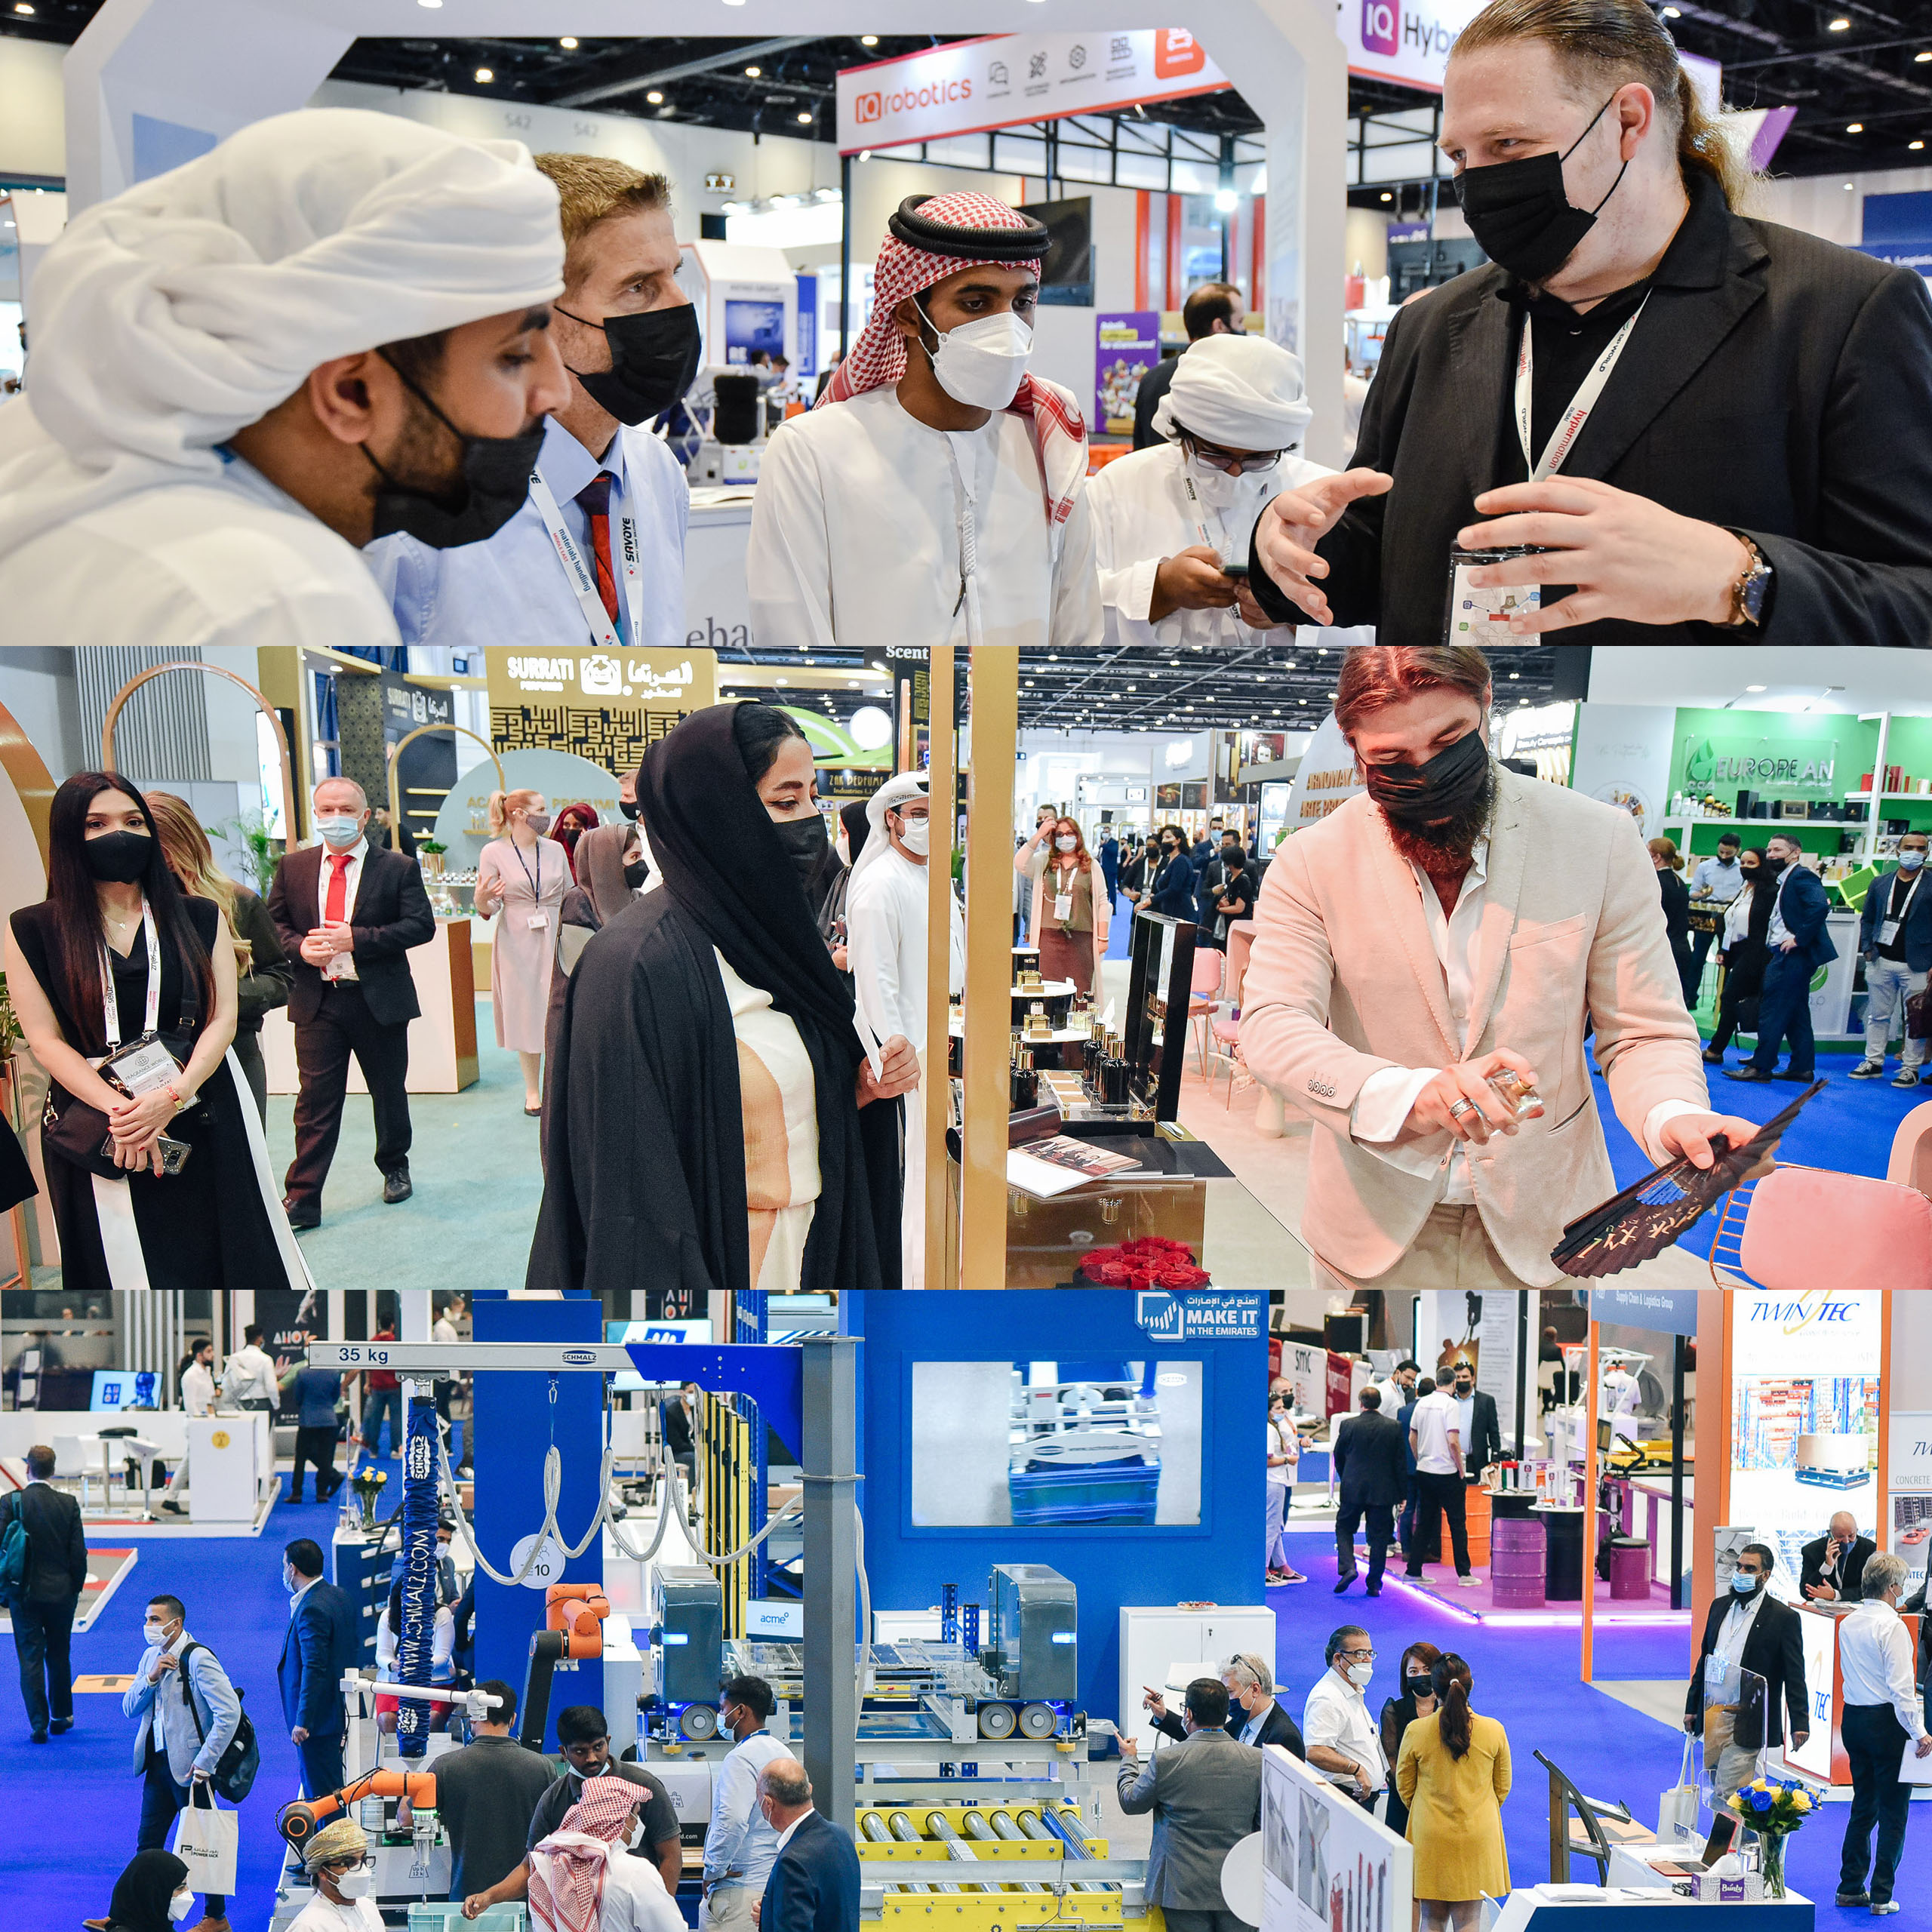 Materials Handling Middle East - Double-digit growth in C-level execs at Dubai trade shows confirms welcome return to business for exhibitions industry